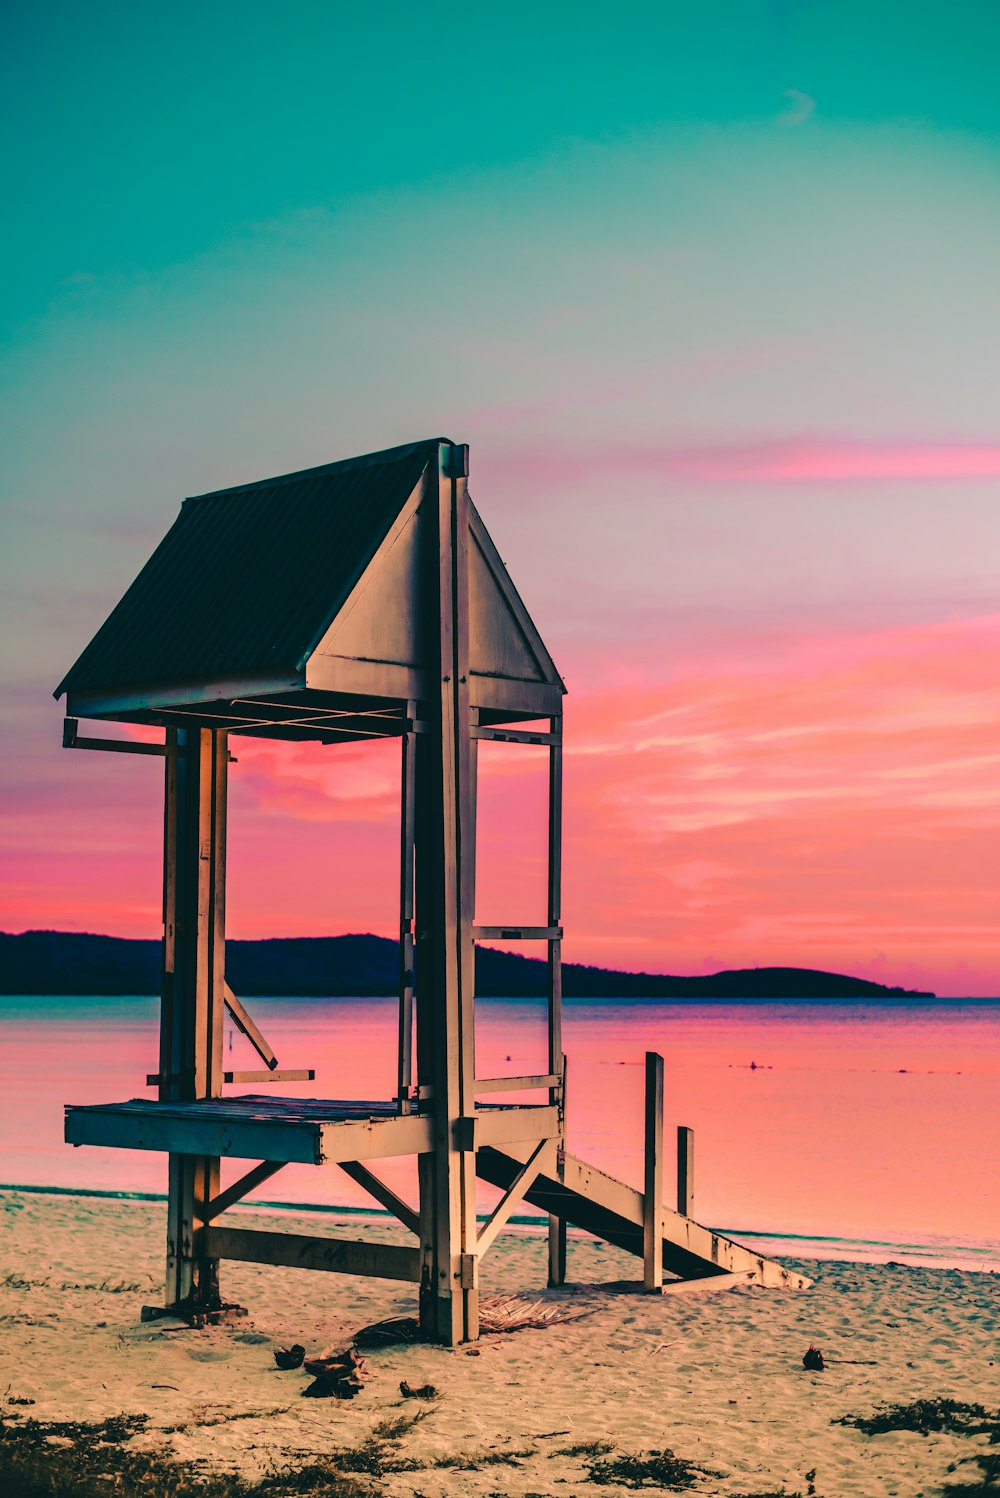 lifeguard house by the seashore during golden hour